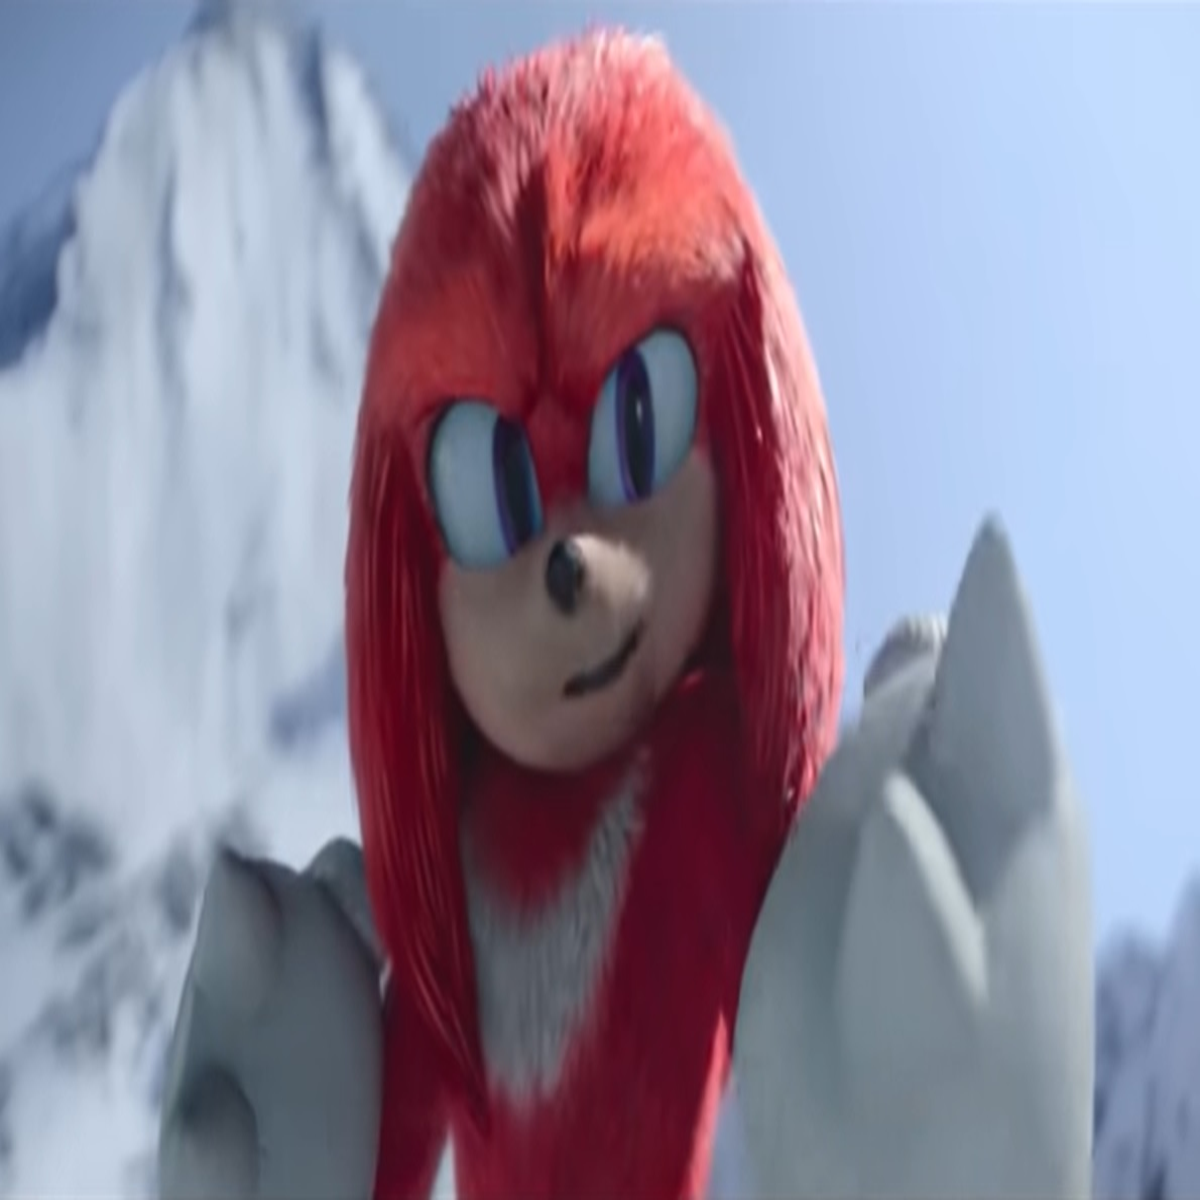 New Amy Live Action Sonic Movie 3 